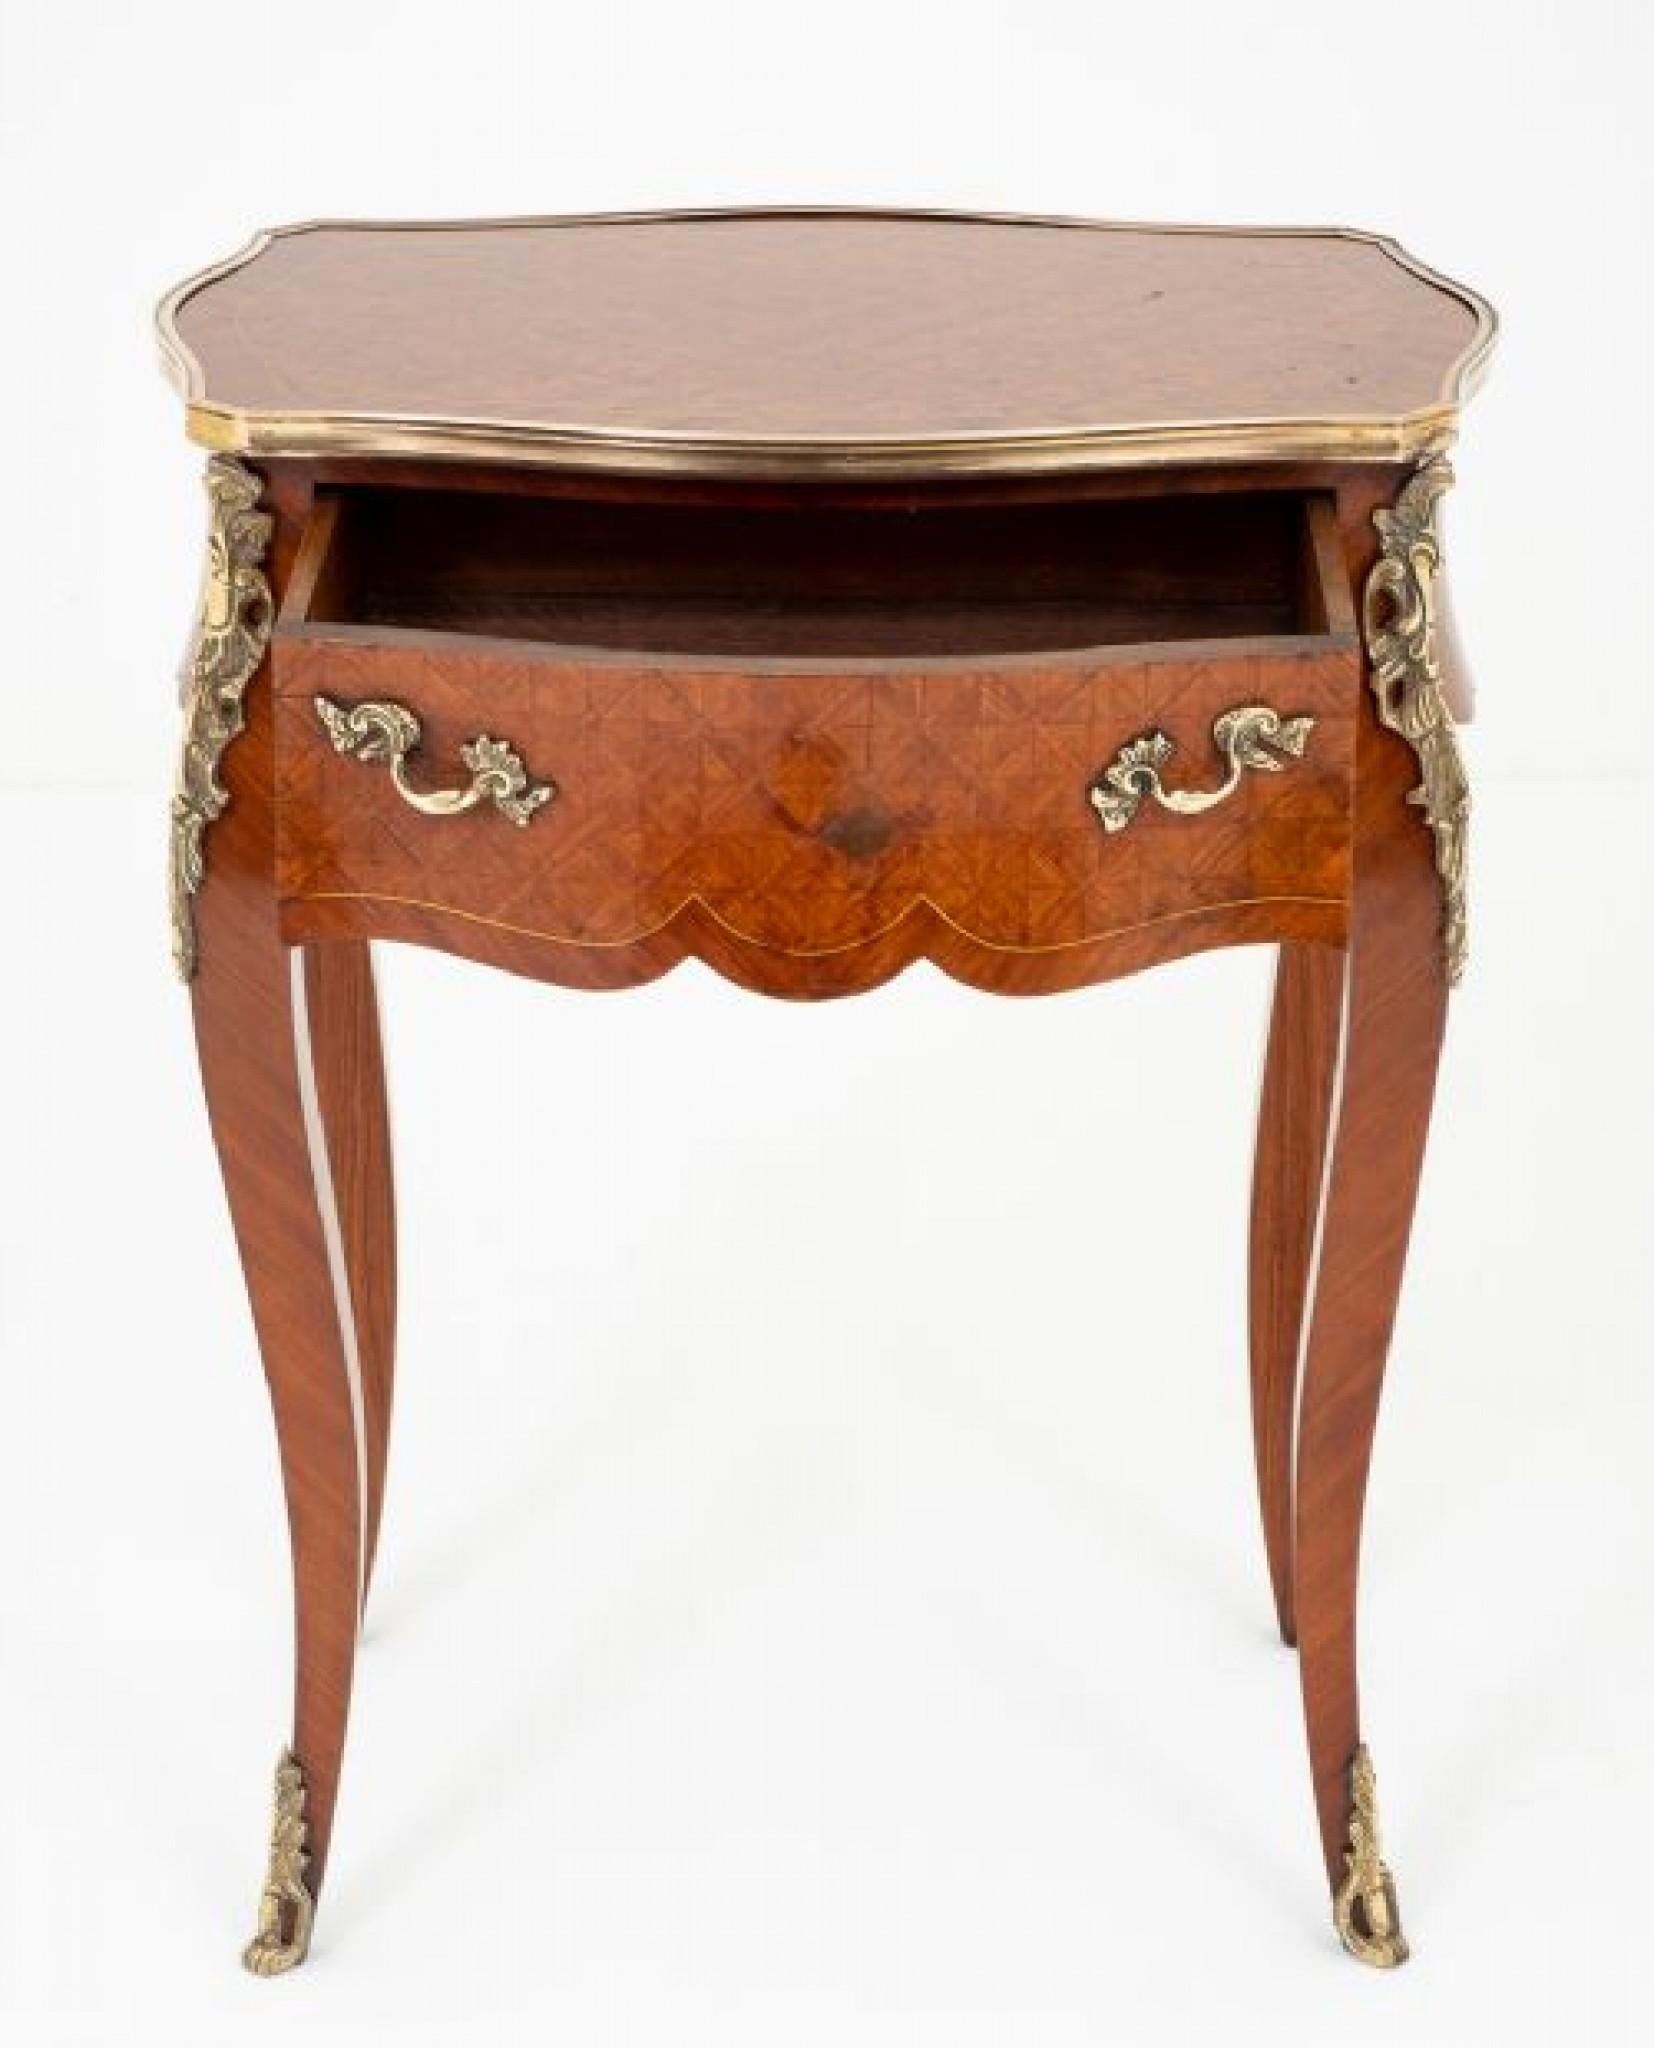 Kingwood French Empire Parquetry Side Table